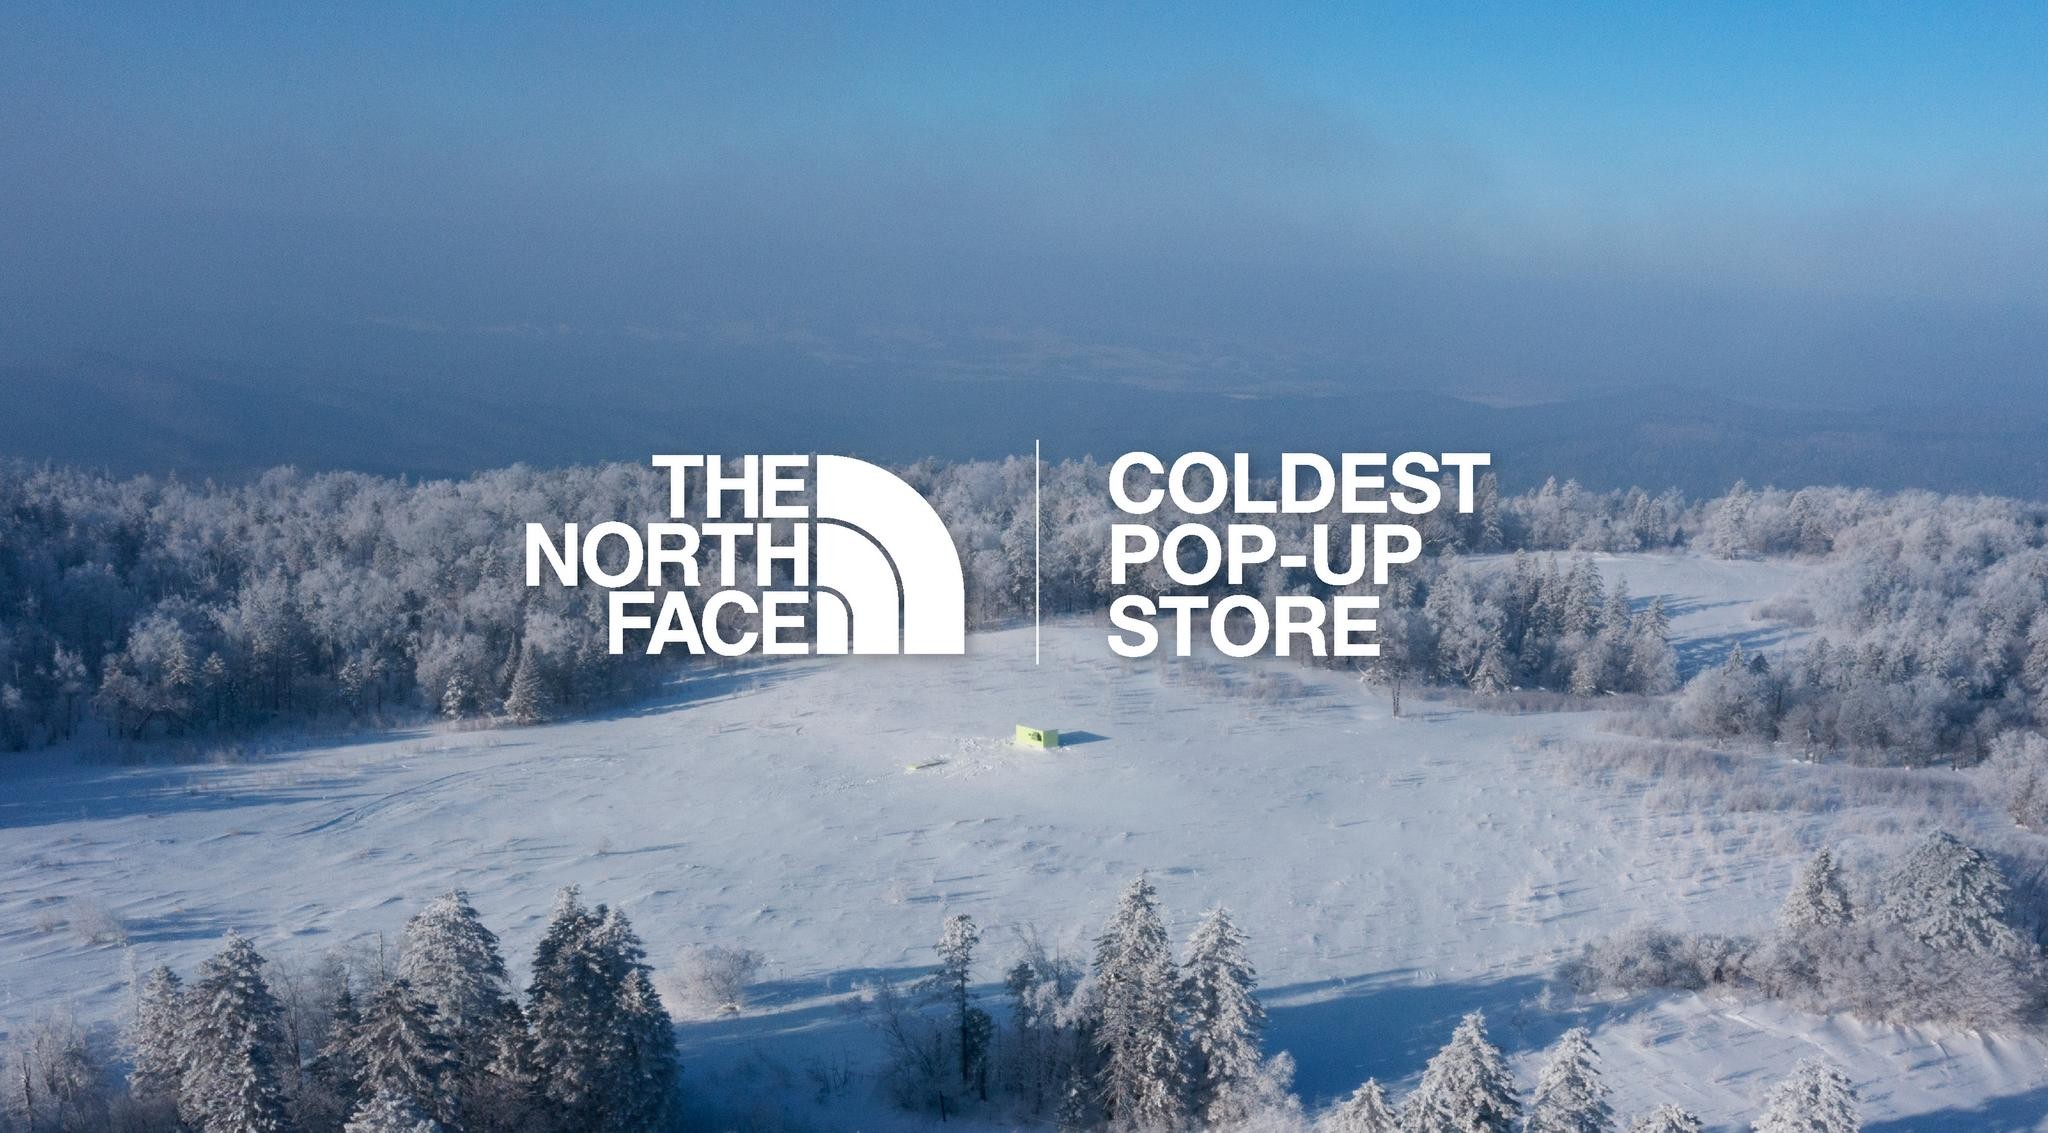 The NorthFace Coldest Pop-Up Store